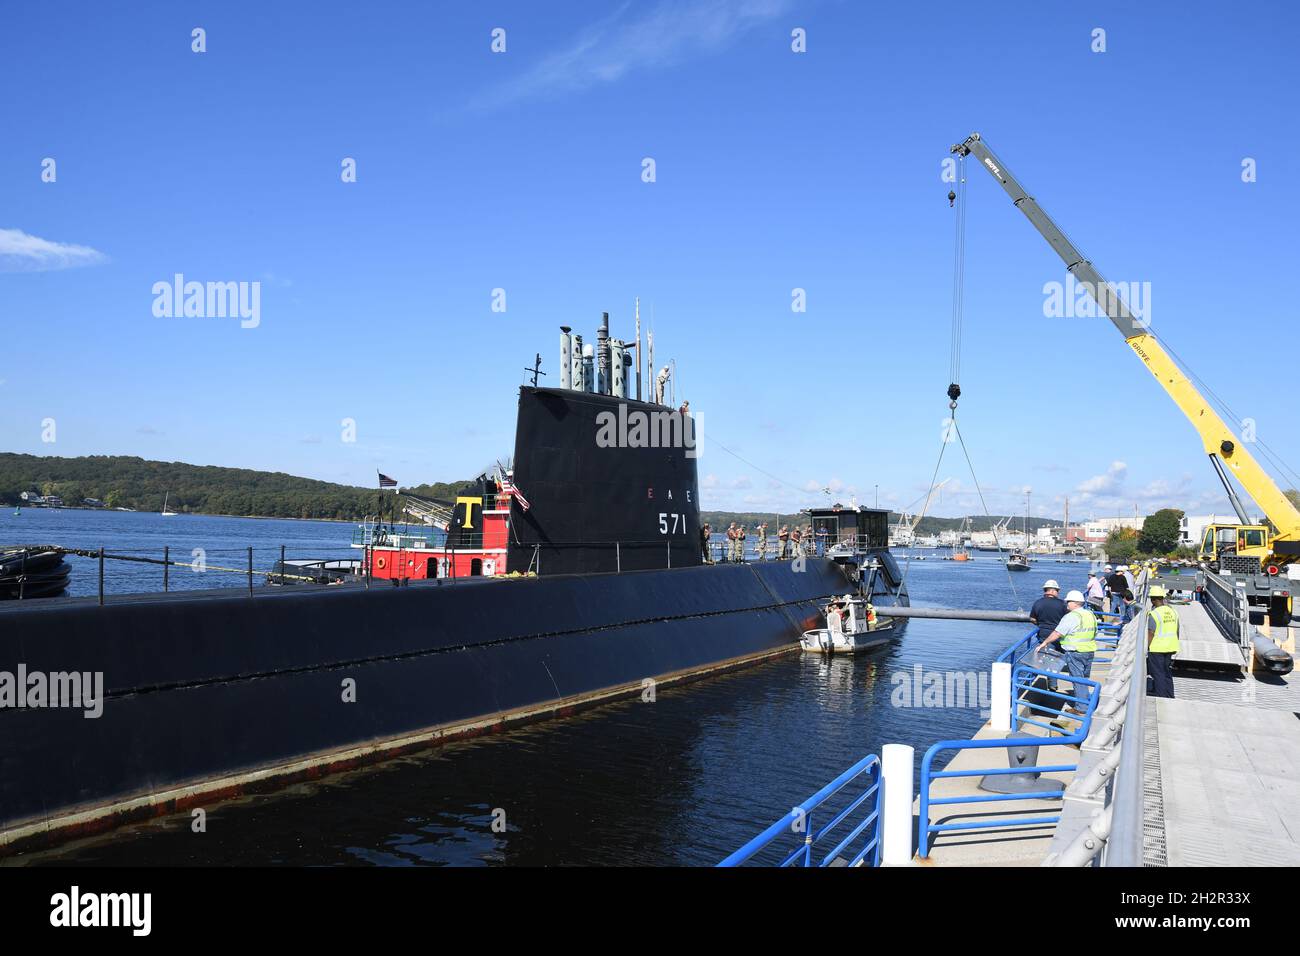 Groton, United States. 15 October, 2021. The U.S. Navy Historic Ship USS Nautilus, is moved from pier side in preparation to be towed up river at Submarine Base New London October 15, 2021 in Groton, Connecticut. Nautilus, was the first nuclear-powered submarine and current Submarine Force Museum centerpiece, and will begin an $36-million dollar preservation project. Credit: CPO Joshua Karsten/U.S. Navy/Alamy Live News Stock Photo